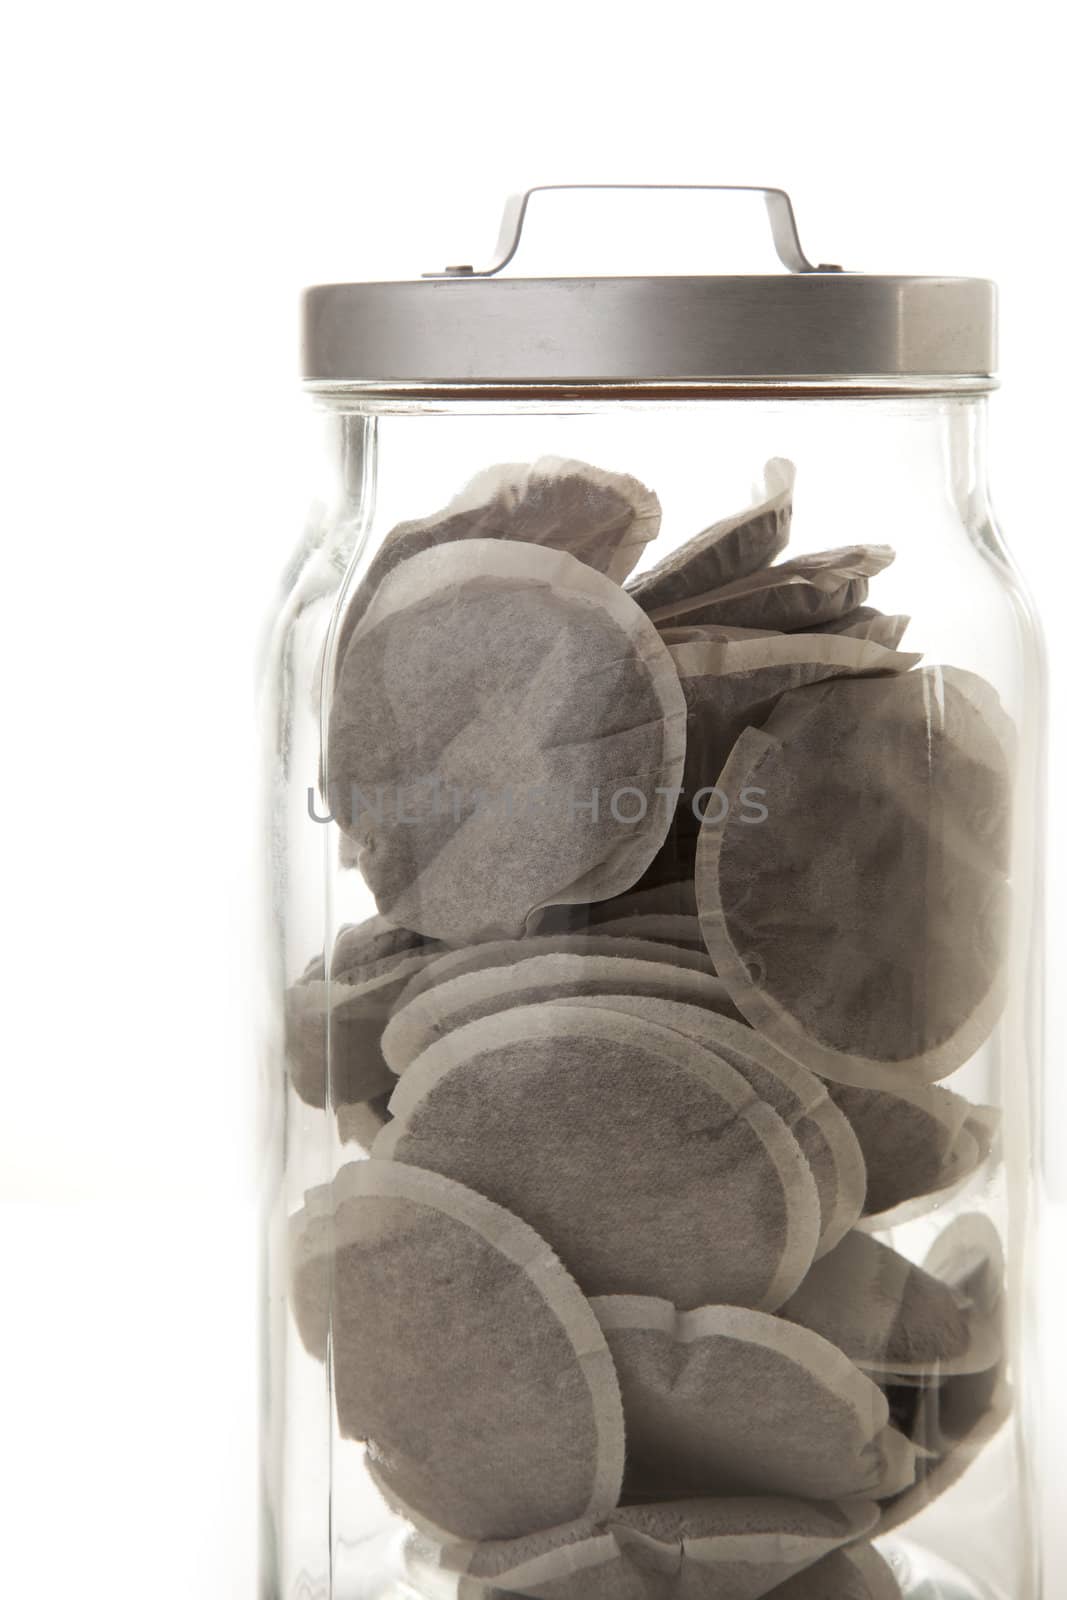 Coffie pads in jar on plain background.